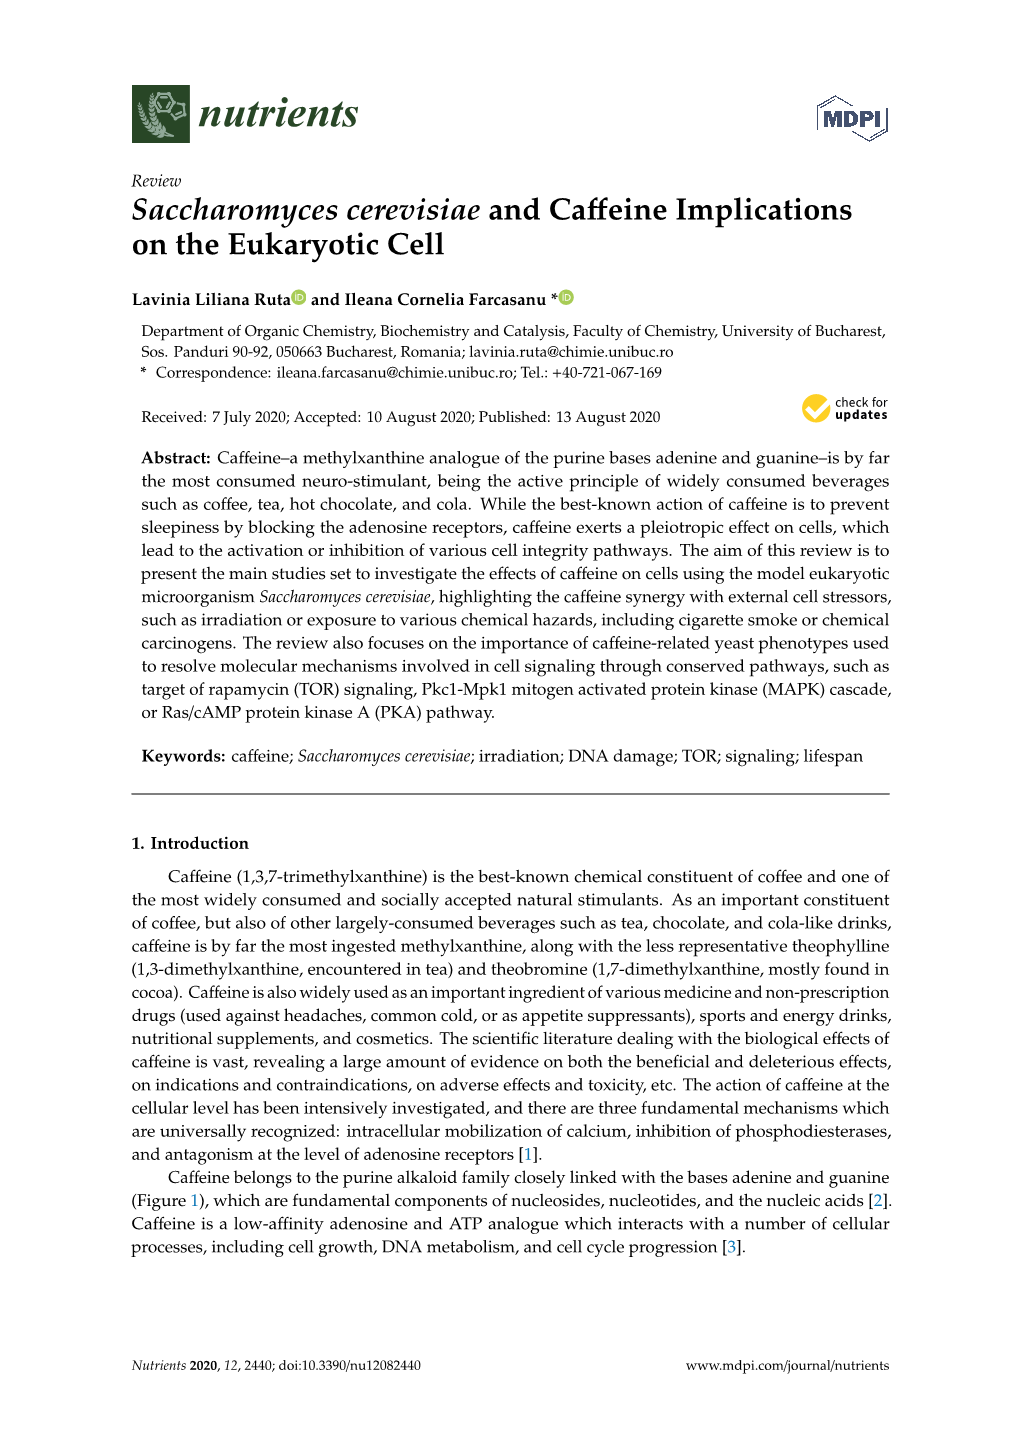 Saccharomyces Cerevisiae and Caffeine Implications on the Eukaryotic Cell